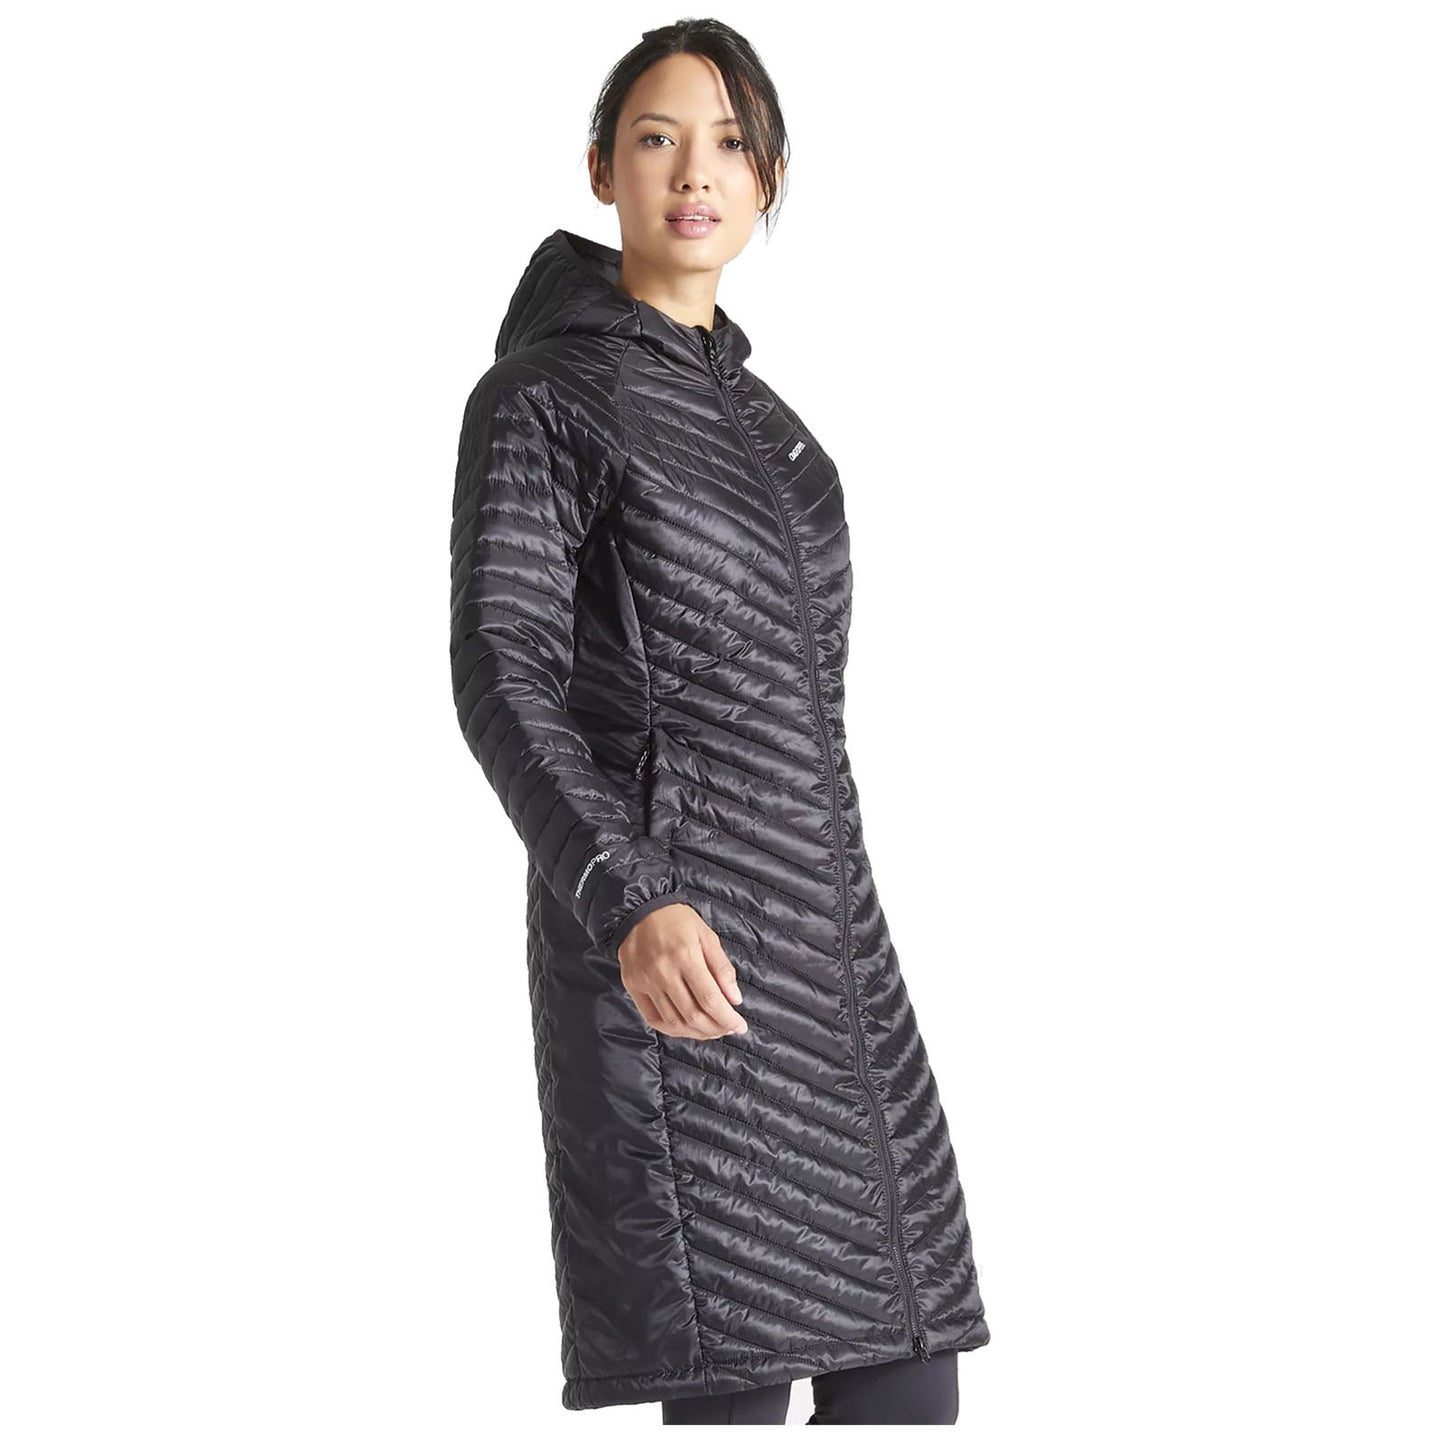 Craghoppers Ladies Insulated ExpoLite Long Hooded Jacket